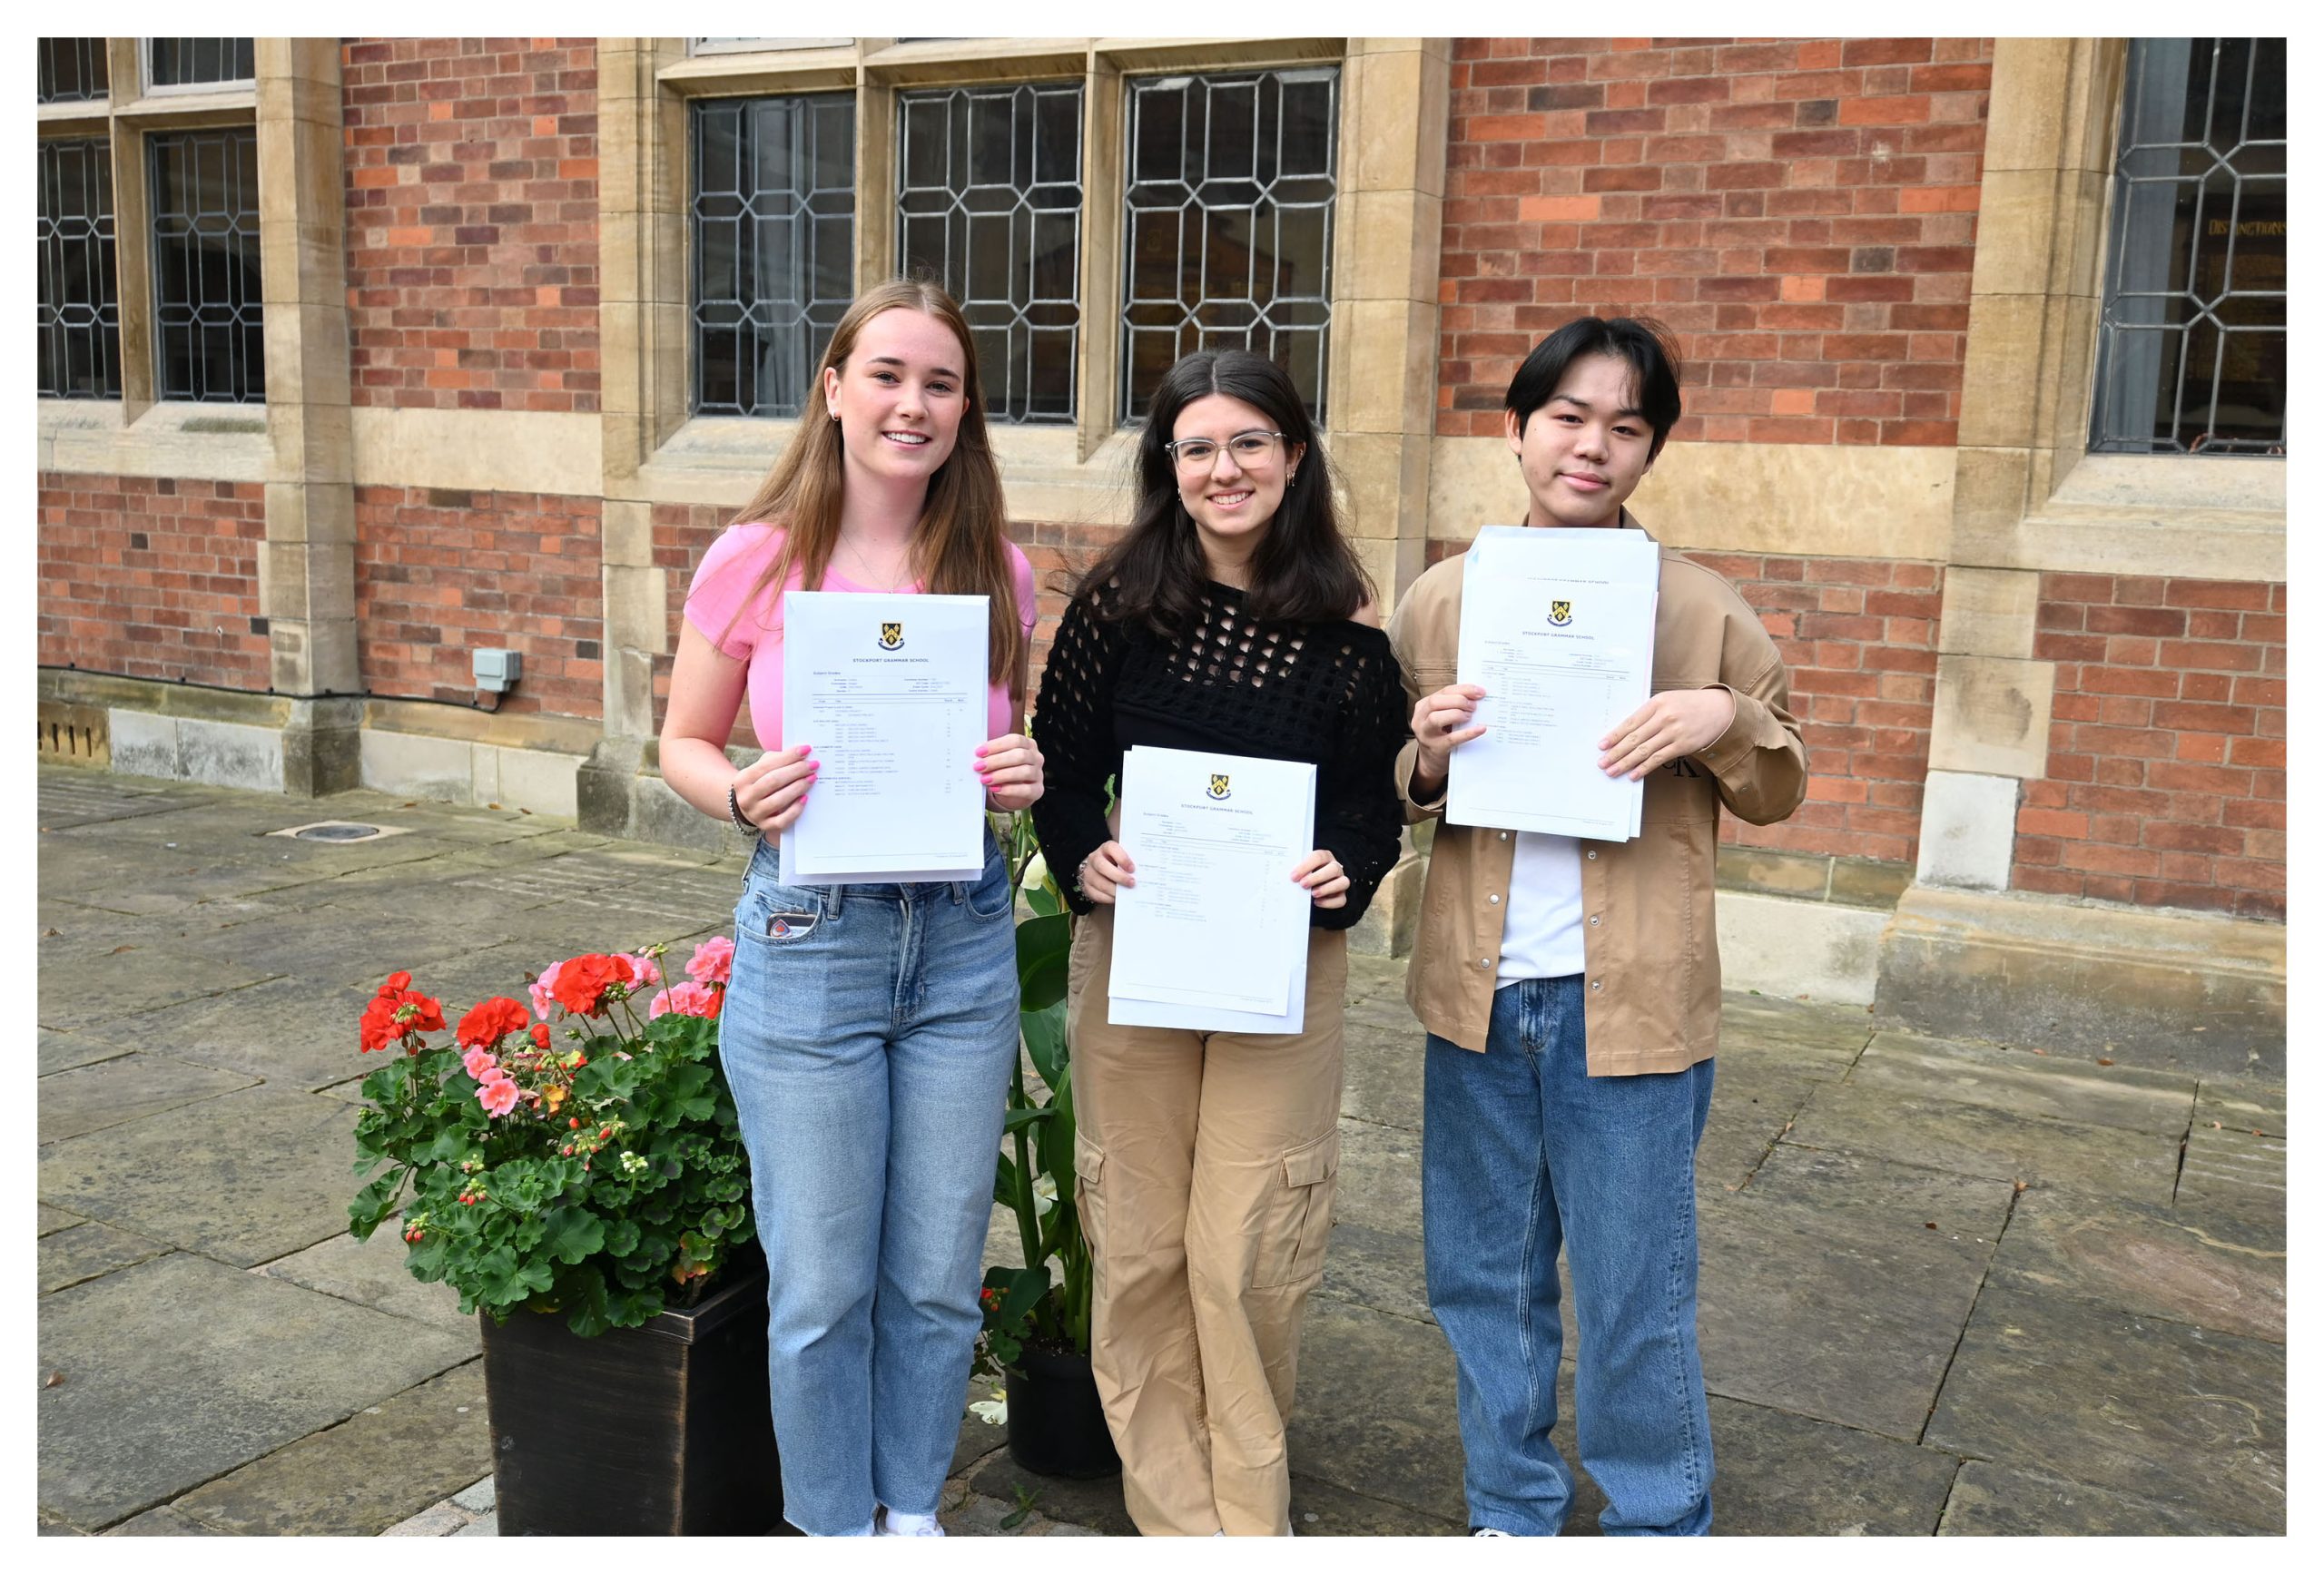 A-level students with their results